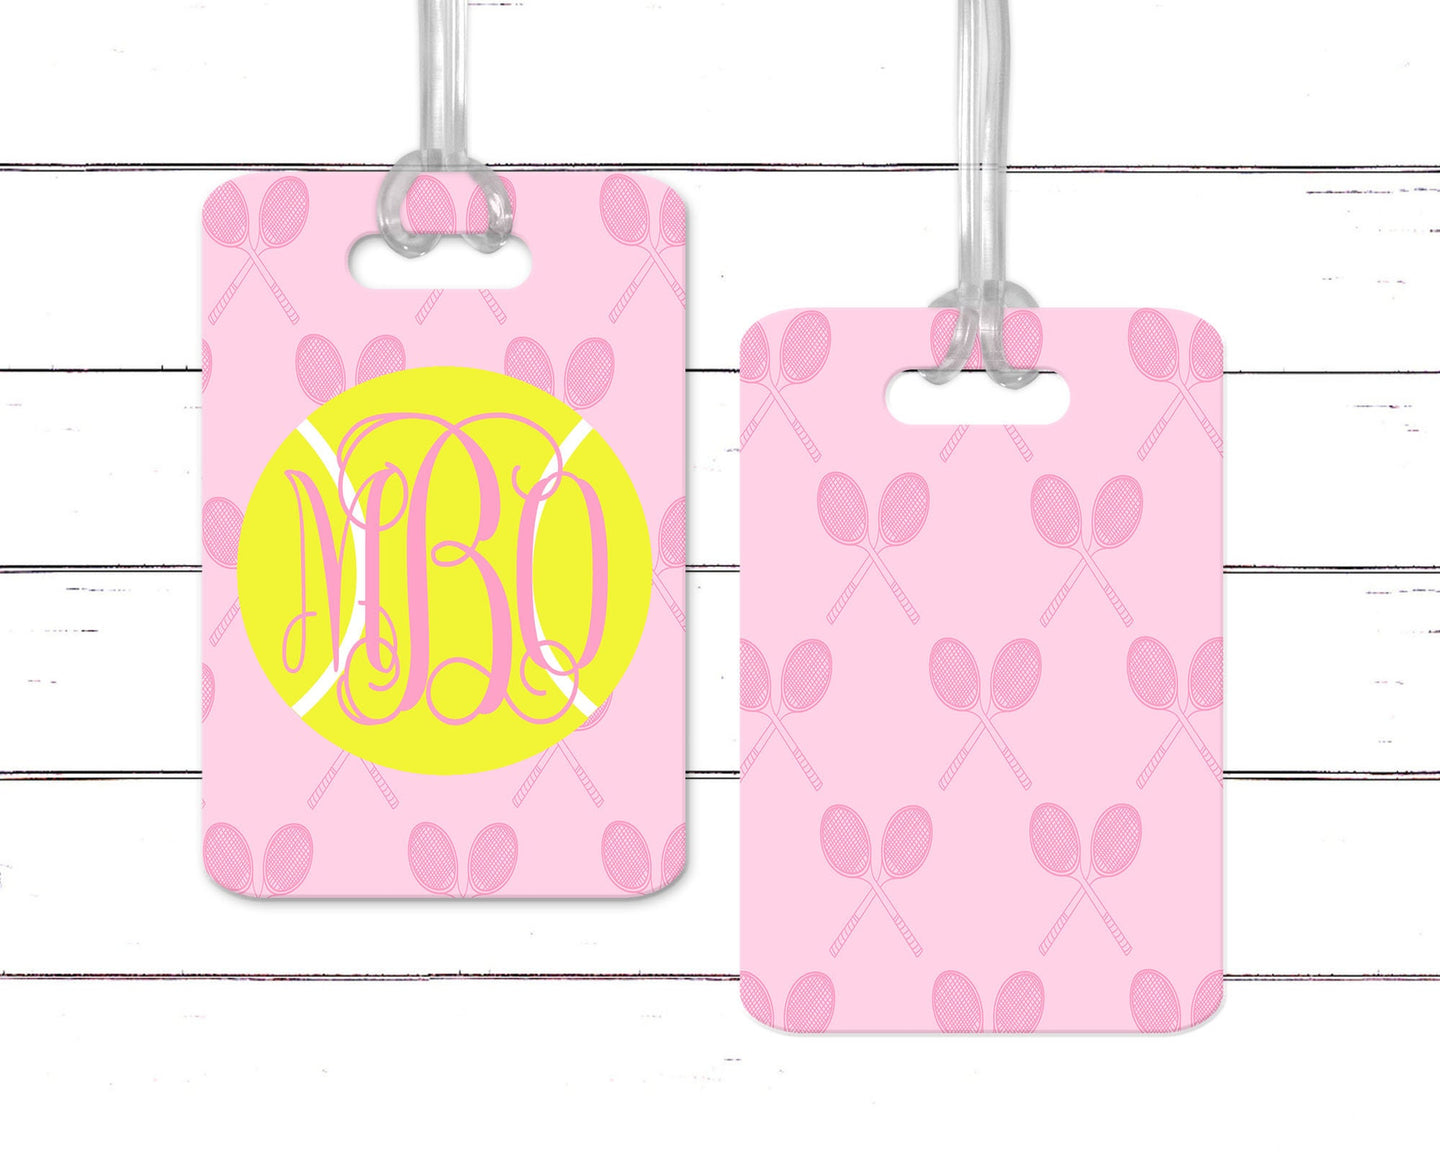 Pink Racquets Tennis Bag Tag. Great Monogrammed Tennis gift. Backpack or Tennis bag! Tennis team gift. Great Tennis Party Favors.